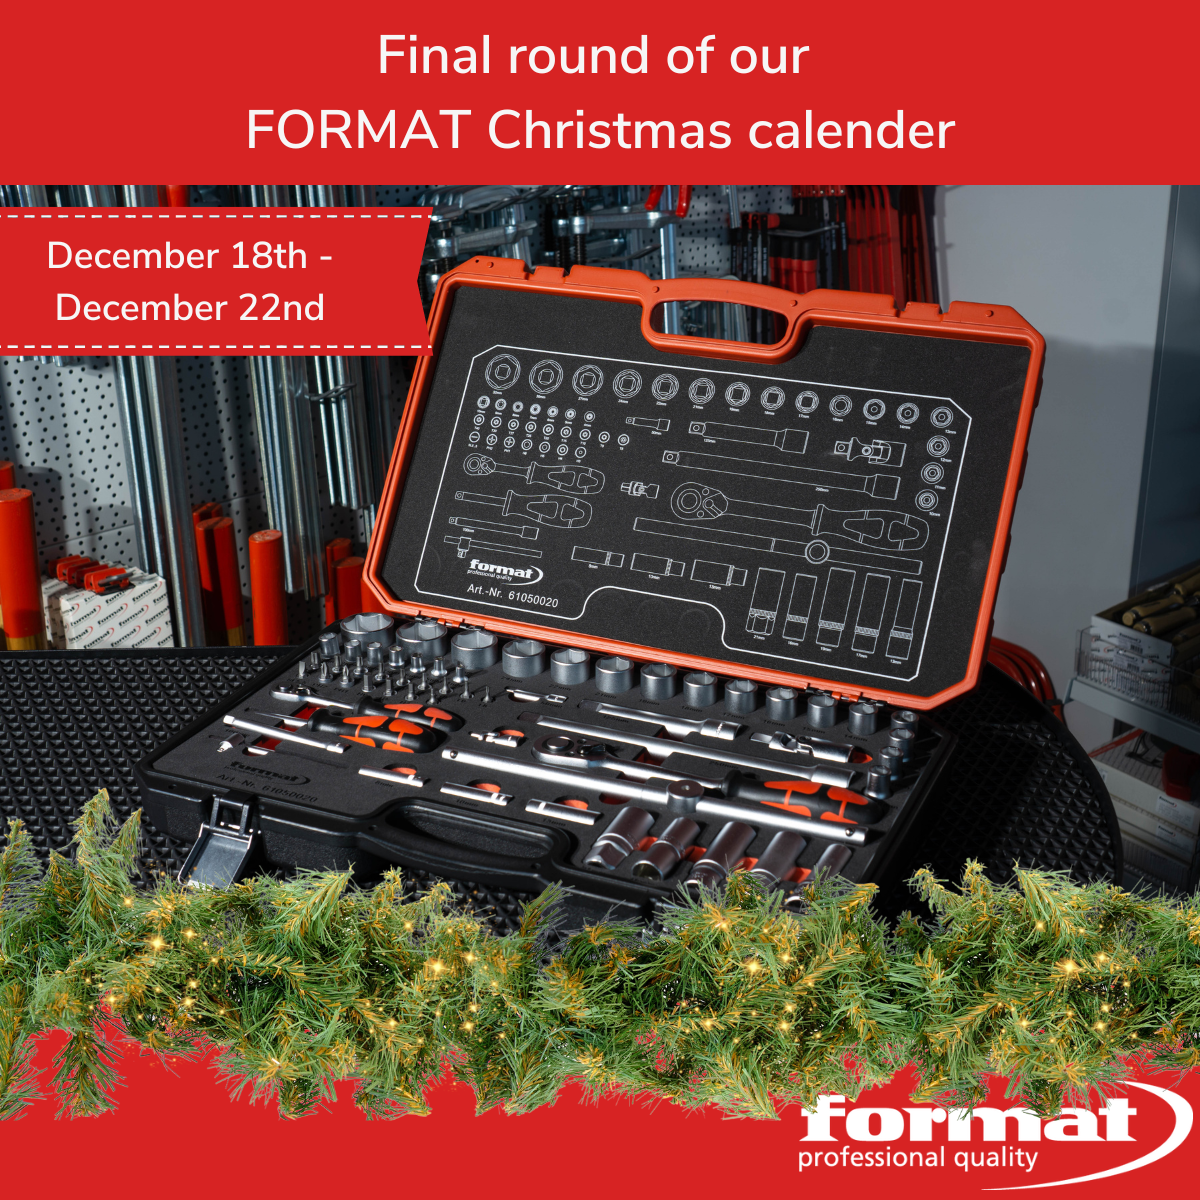 Our big FORMAT Christmas calendar goes into the 3rd round!